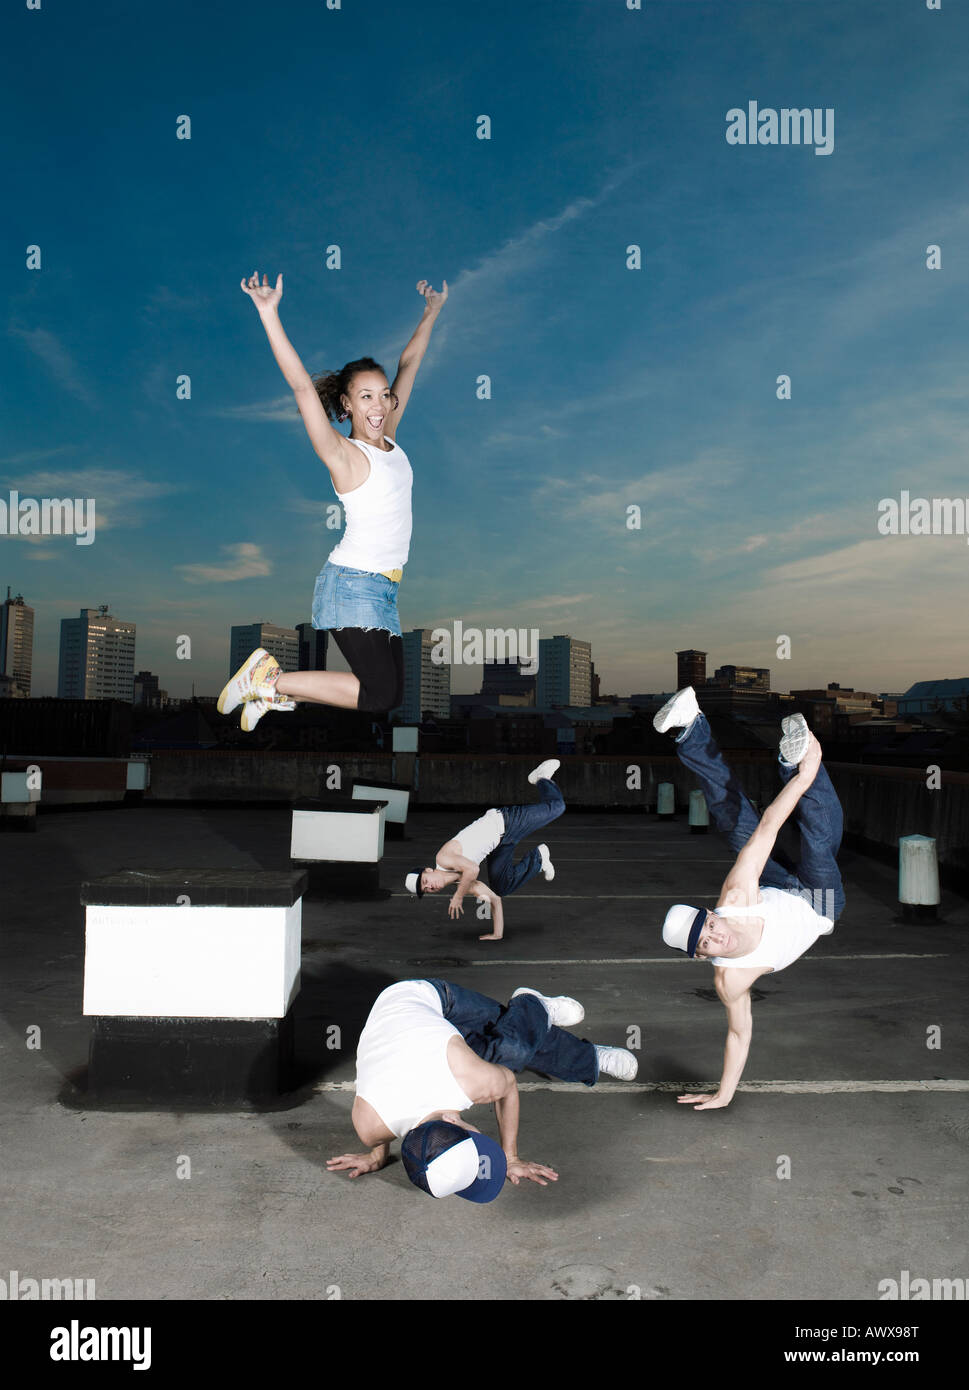 Breakdancers in different freezes Stock Photo